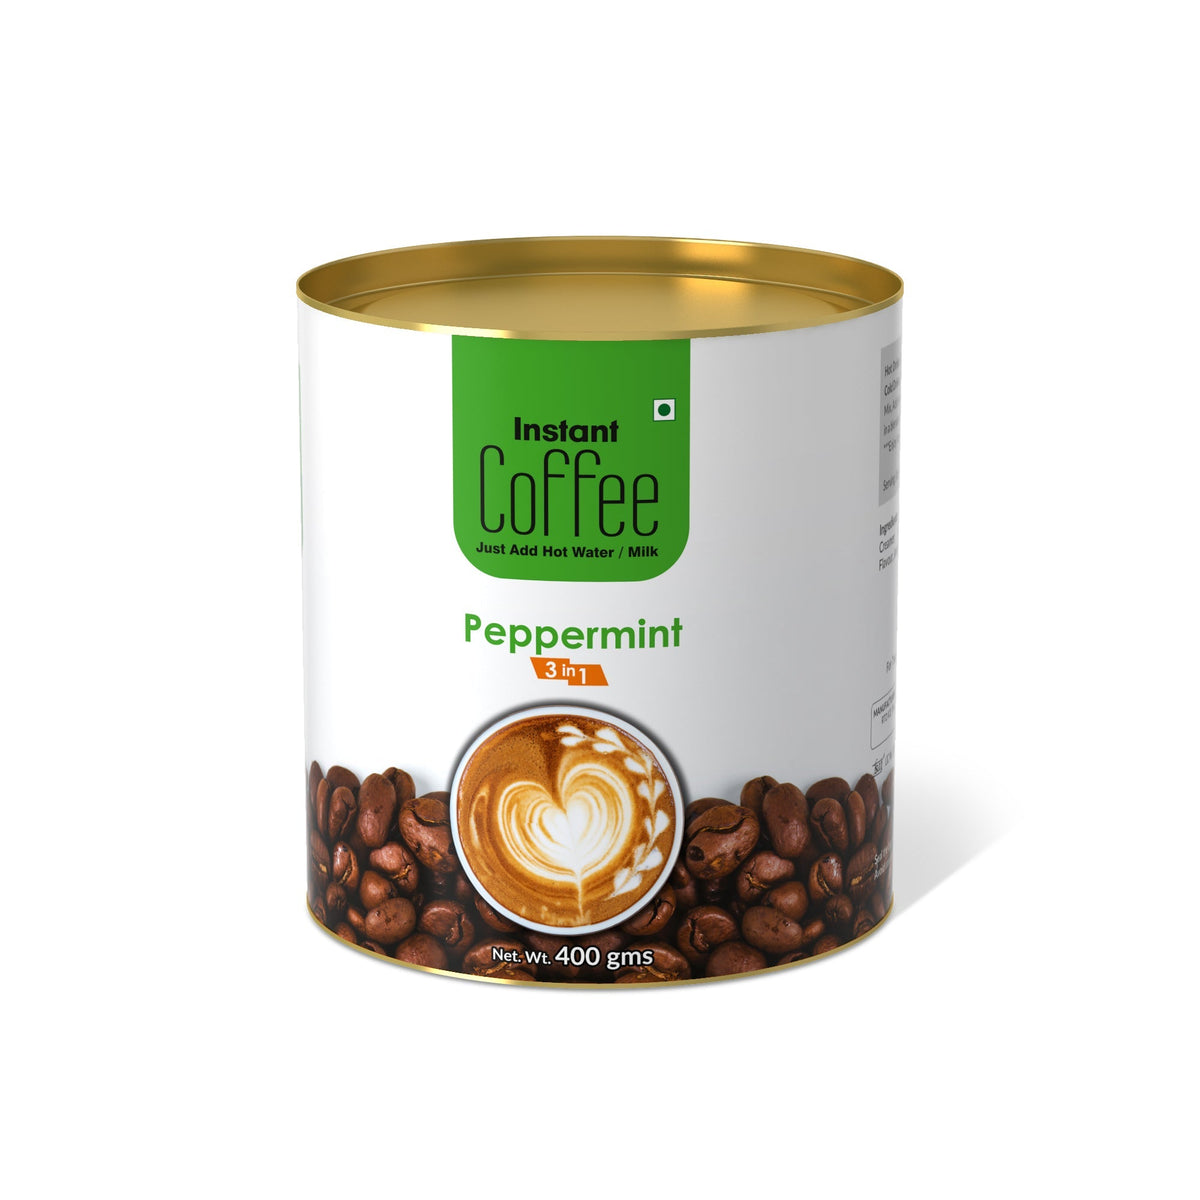 Peppermint Instant Coffee Premix (3 in 1) - 400 gms